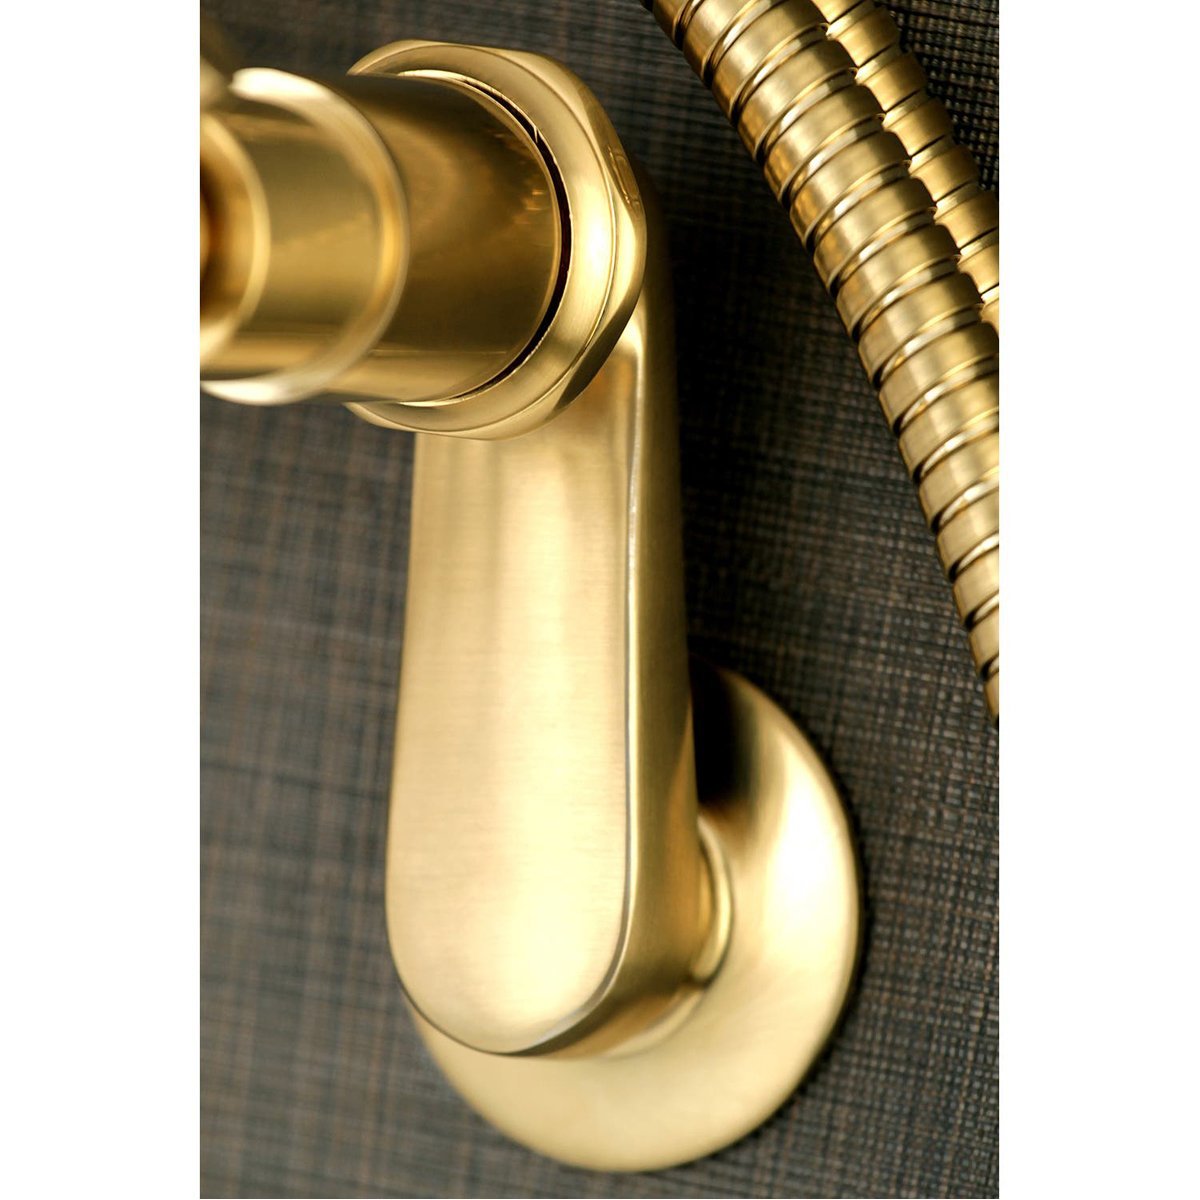 Kingston Brass Concord Wall Mount Tub Filler with Hand Shower